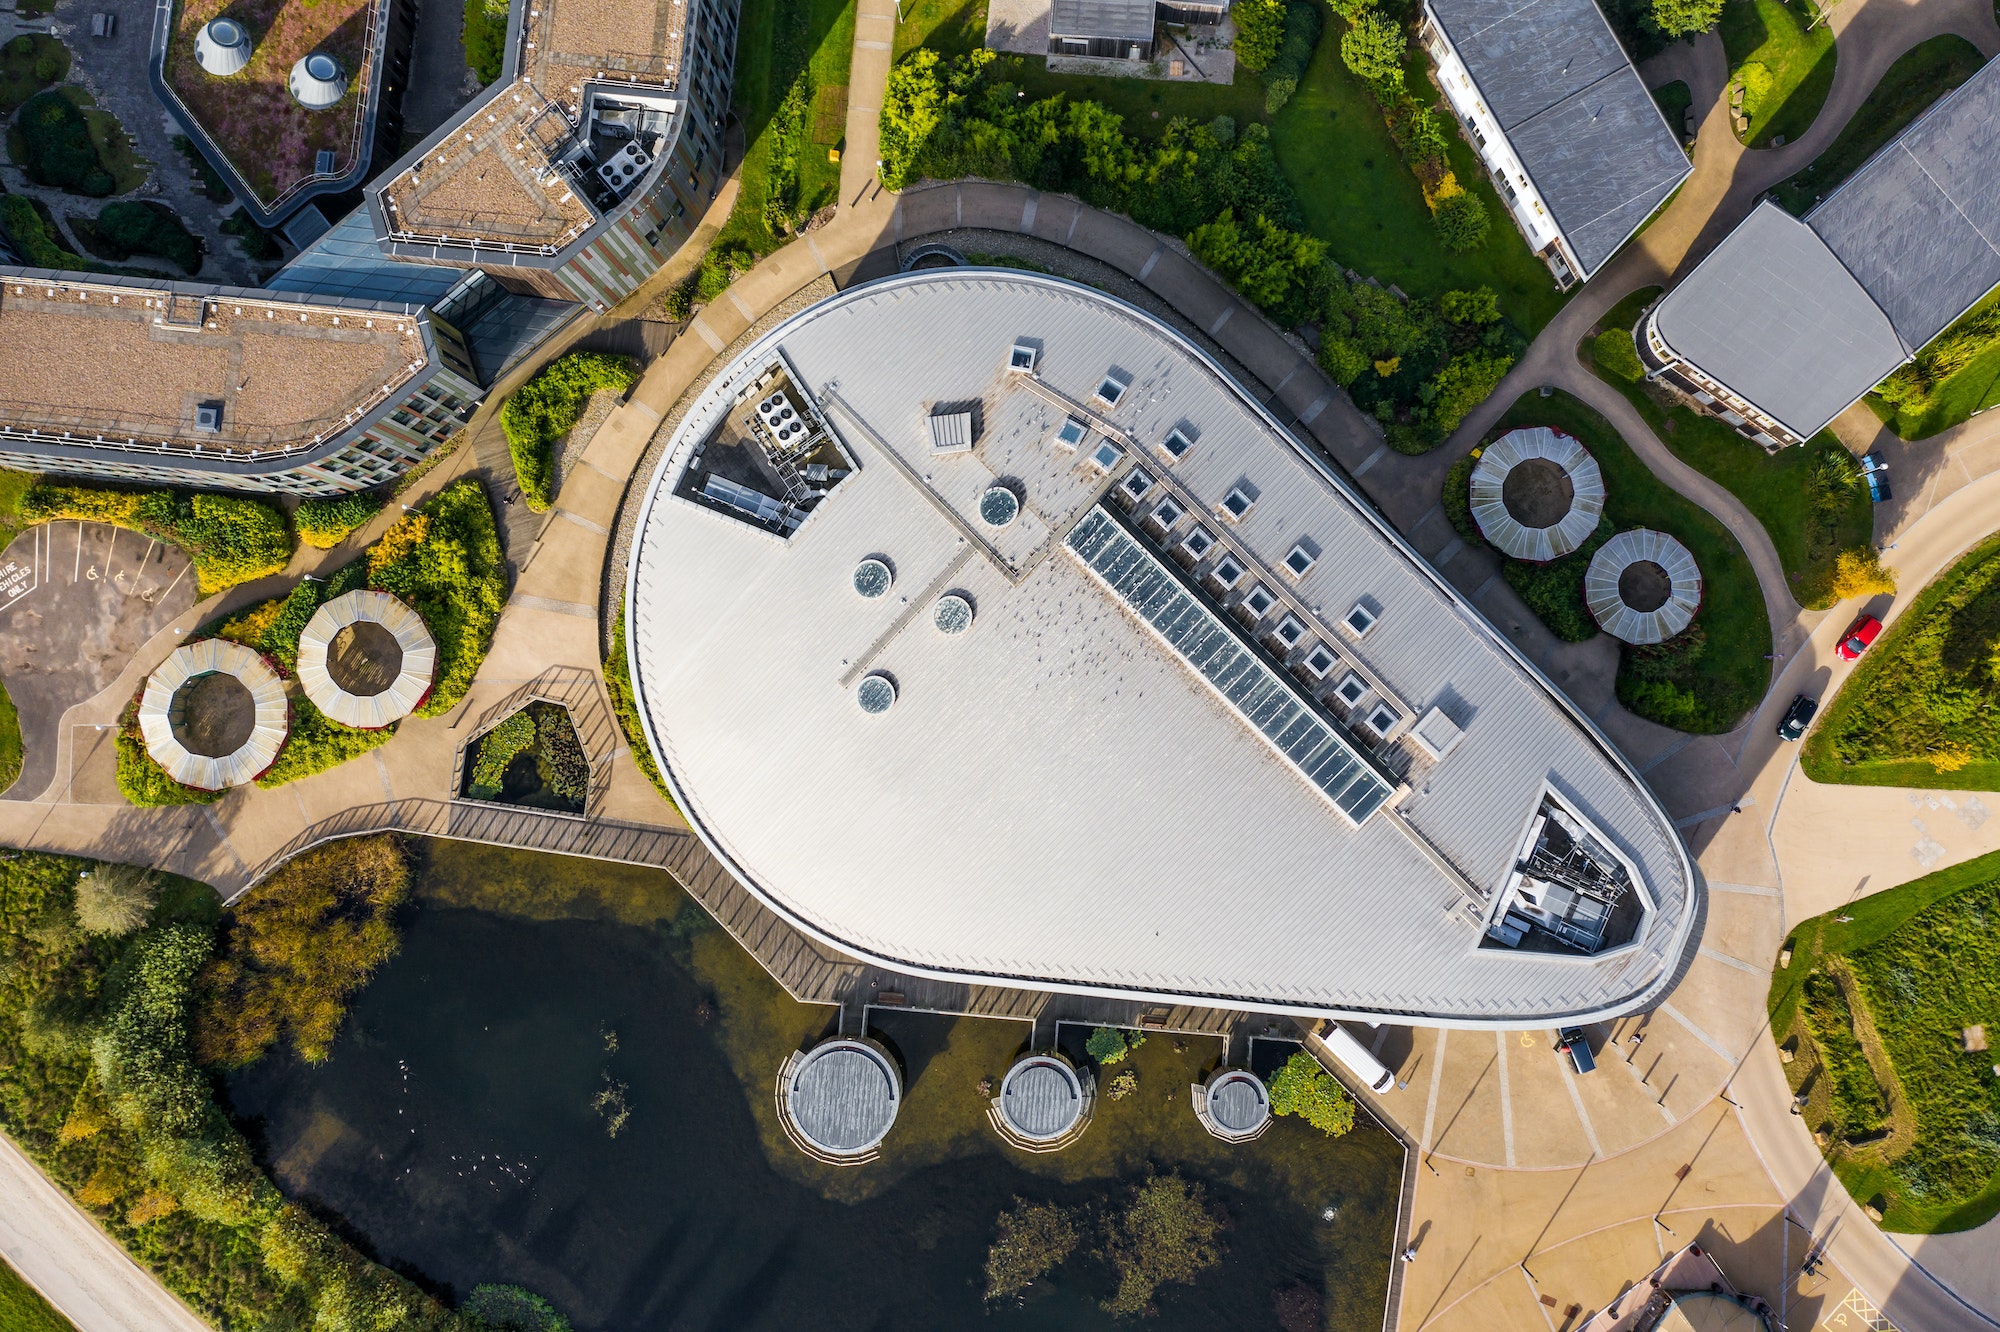 Aerial view of a futuristic building designed by an architect